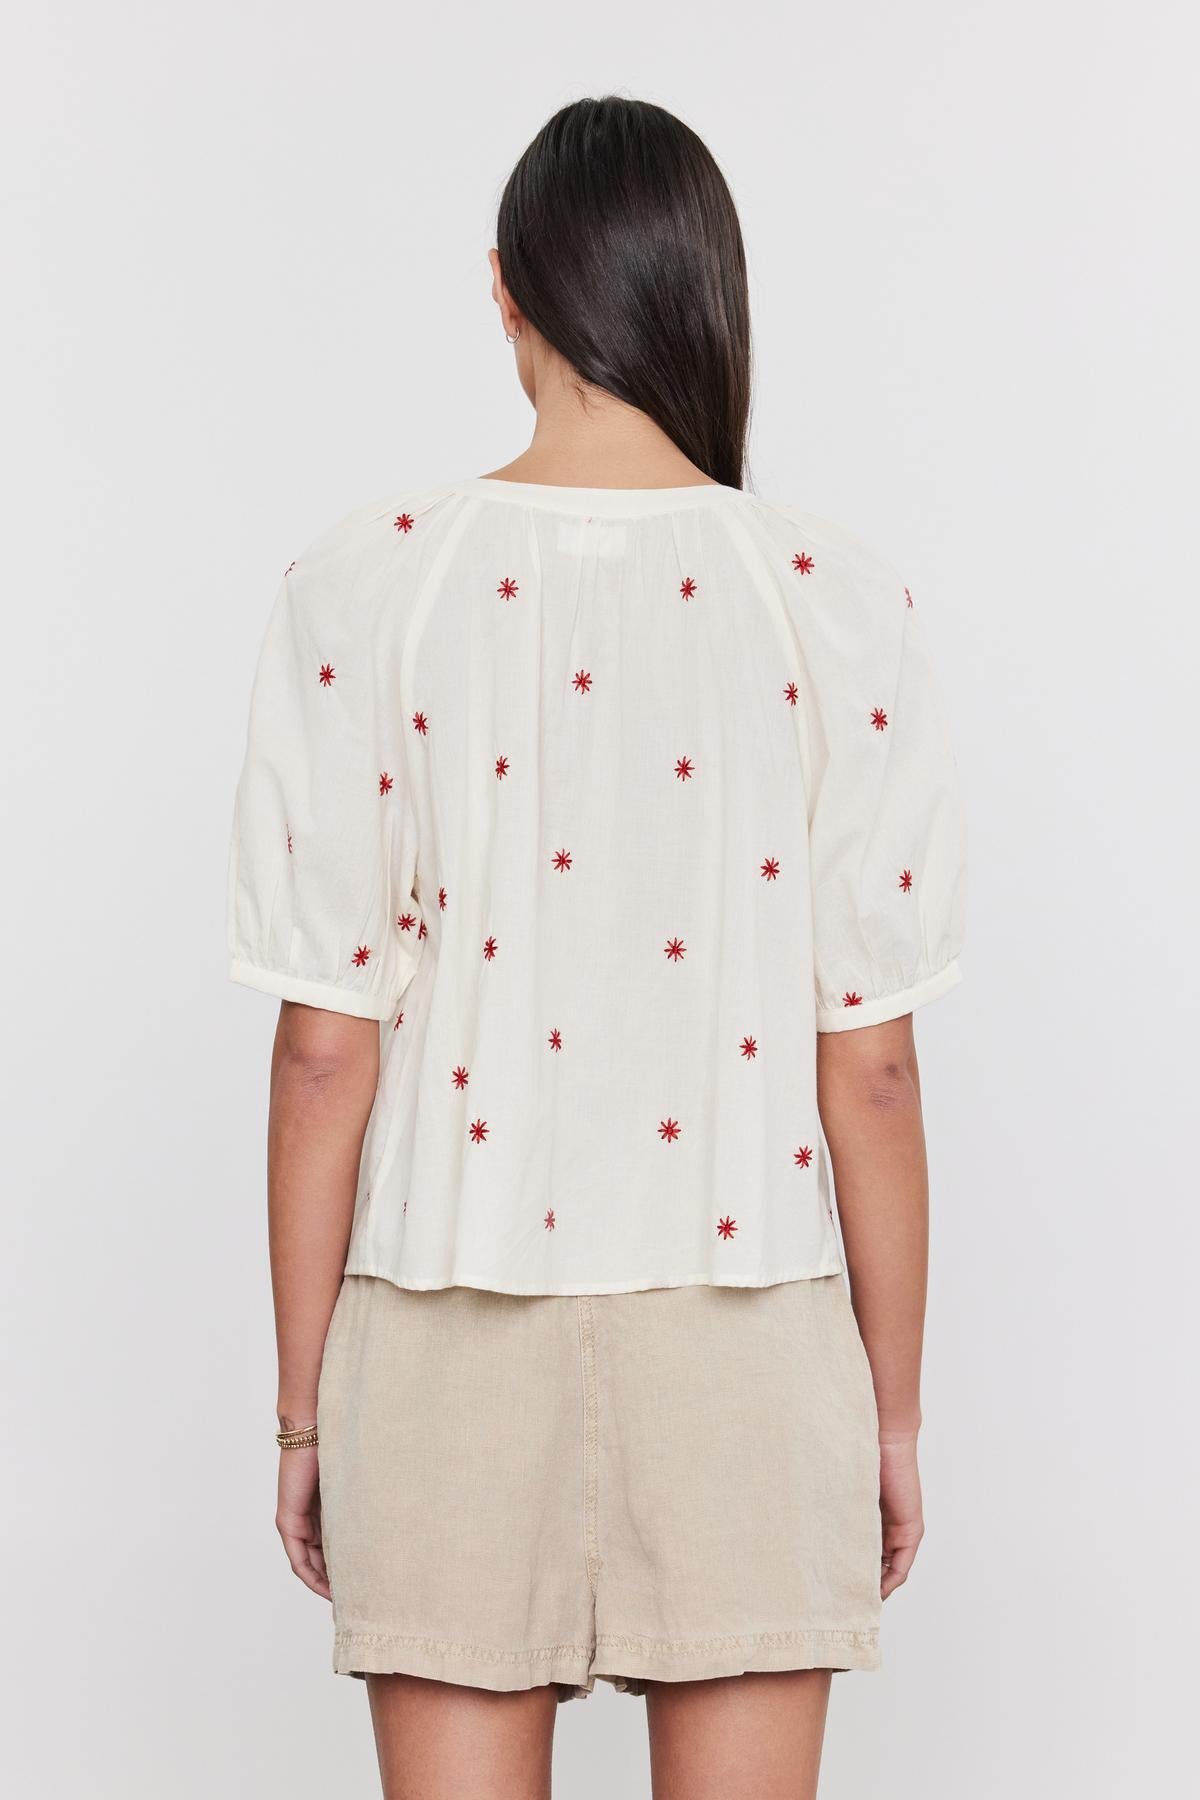 A woman from behind wearing a white Velvet by Graham & Spencer AMIRA TOP with red floral embroidery and button front detail, paired with a beige skirt.-36910000373953